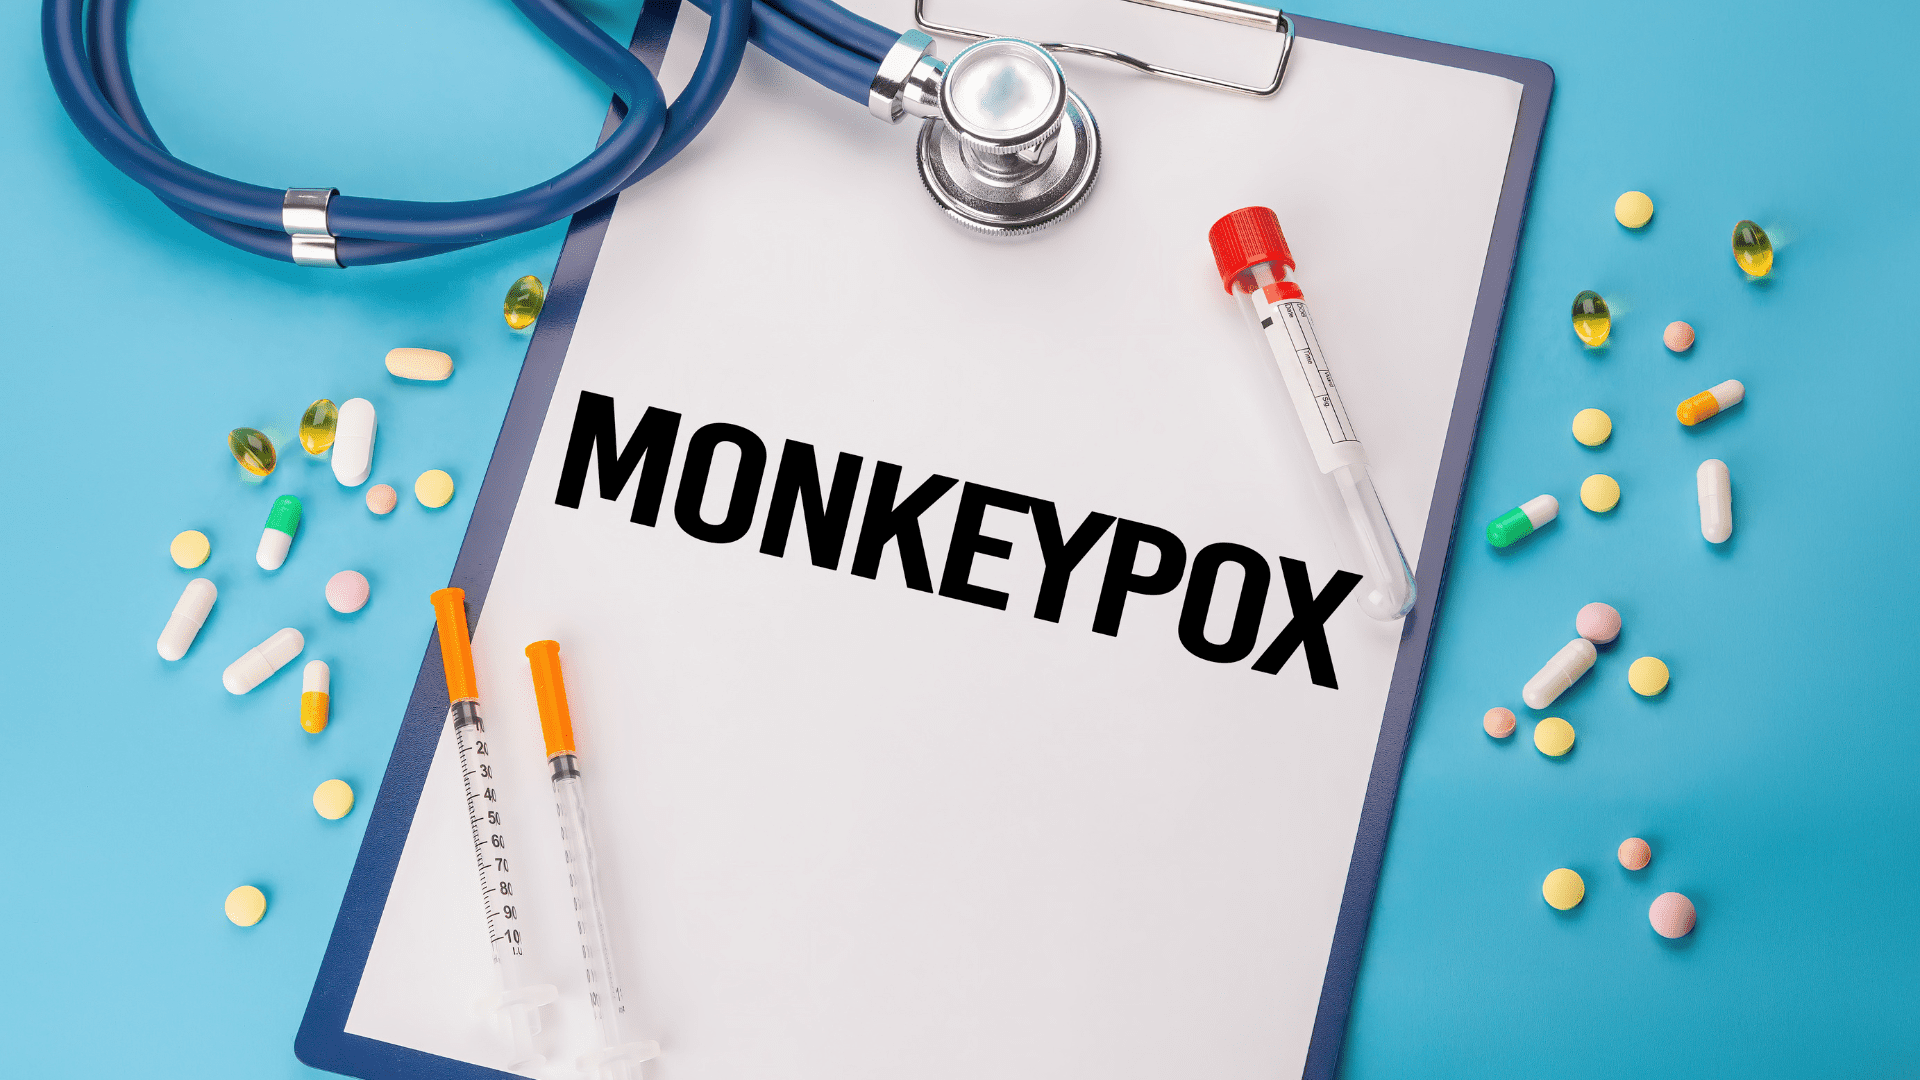 Featured image for “2 new cases of monkeypox found in Delaware”